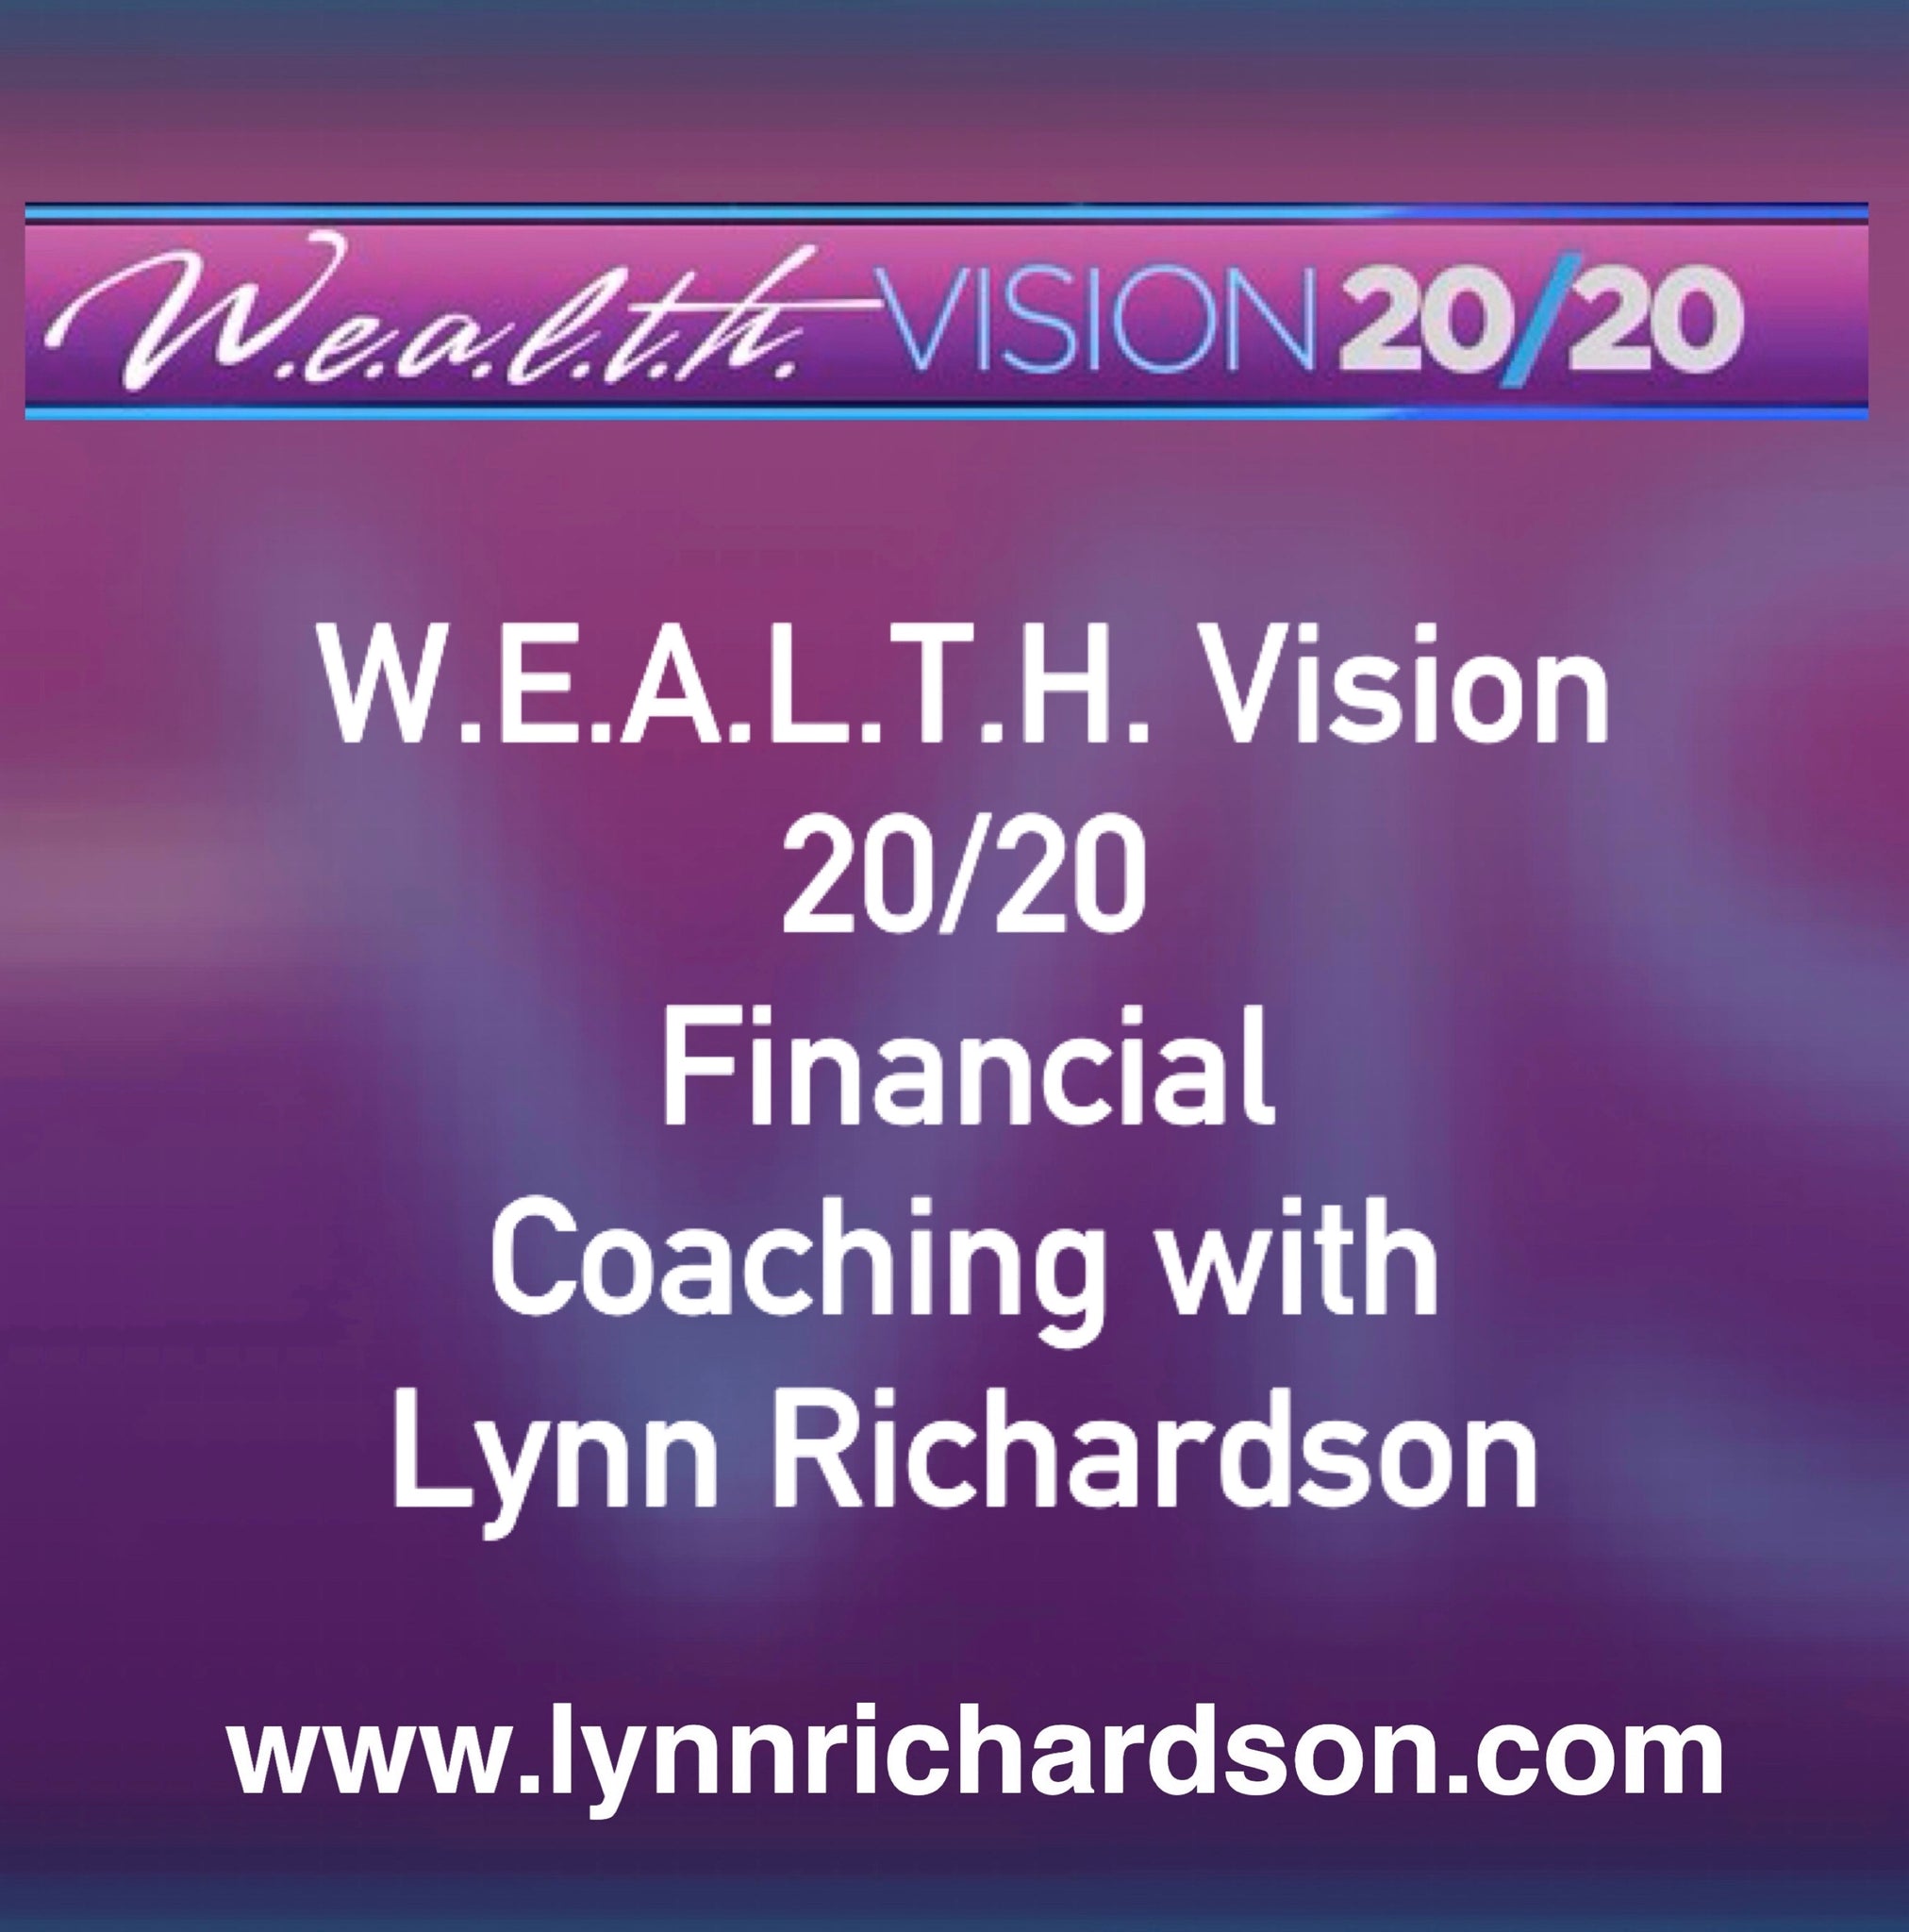 Subscription Test of W.E.A.L.T.H. Vision 20/20 Financial Coaching